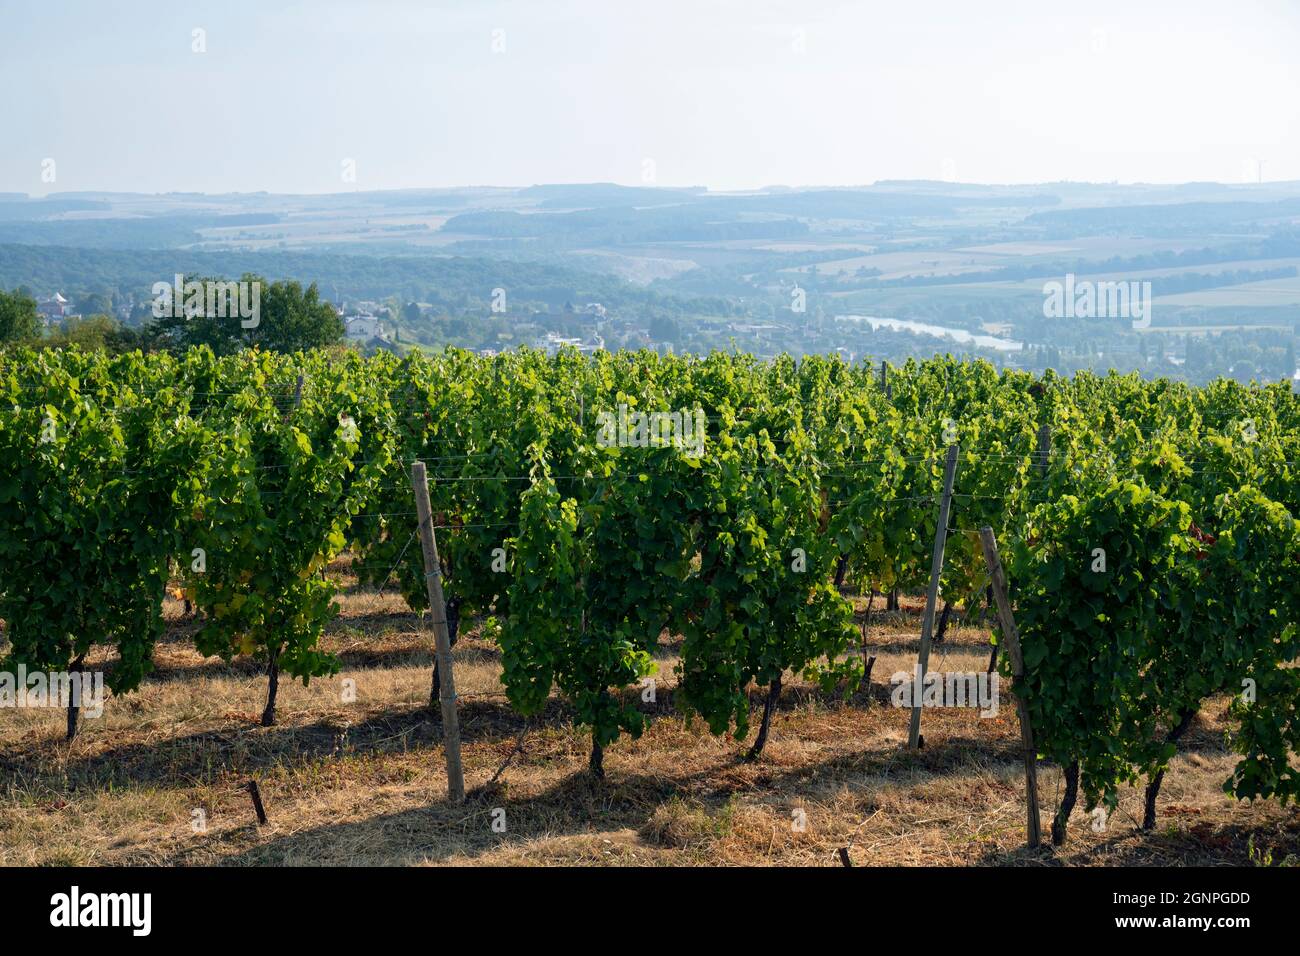 Europe, Luxembourg, Moselle Region, Point De Vue Remich, Vineyards along the Moselle Valley producing Grapes for Crémant Sparkling Wines Stock Photo